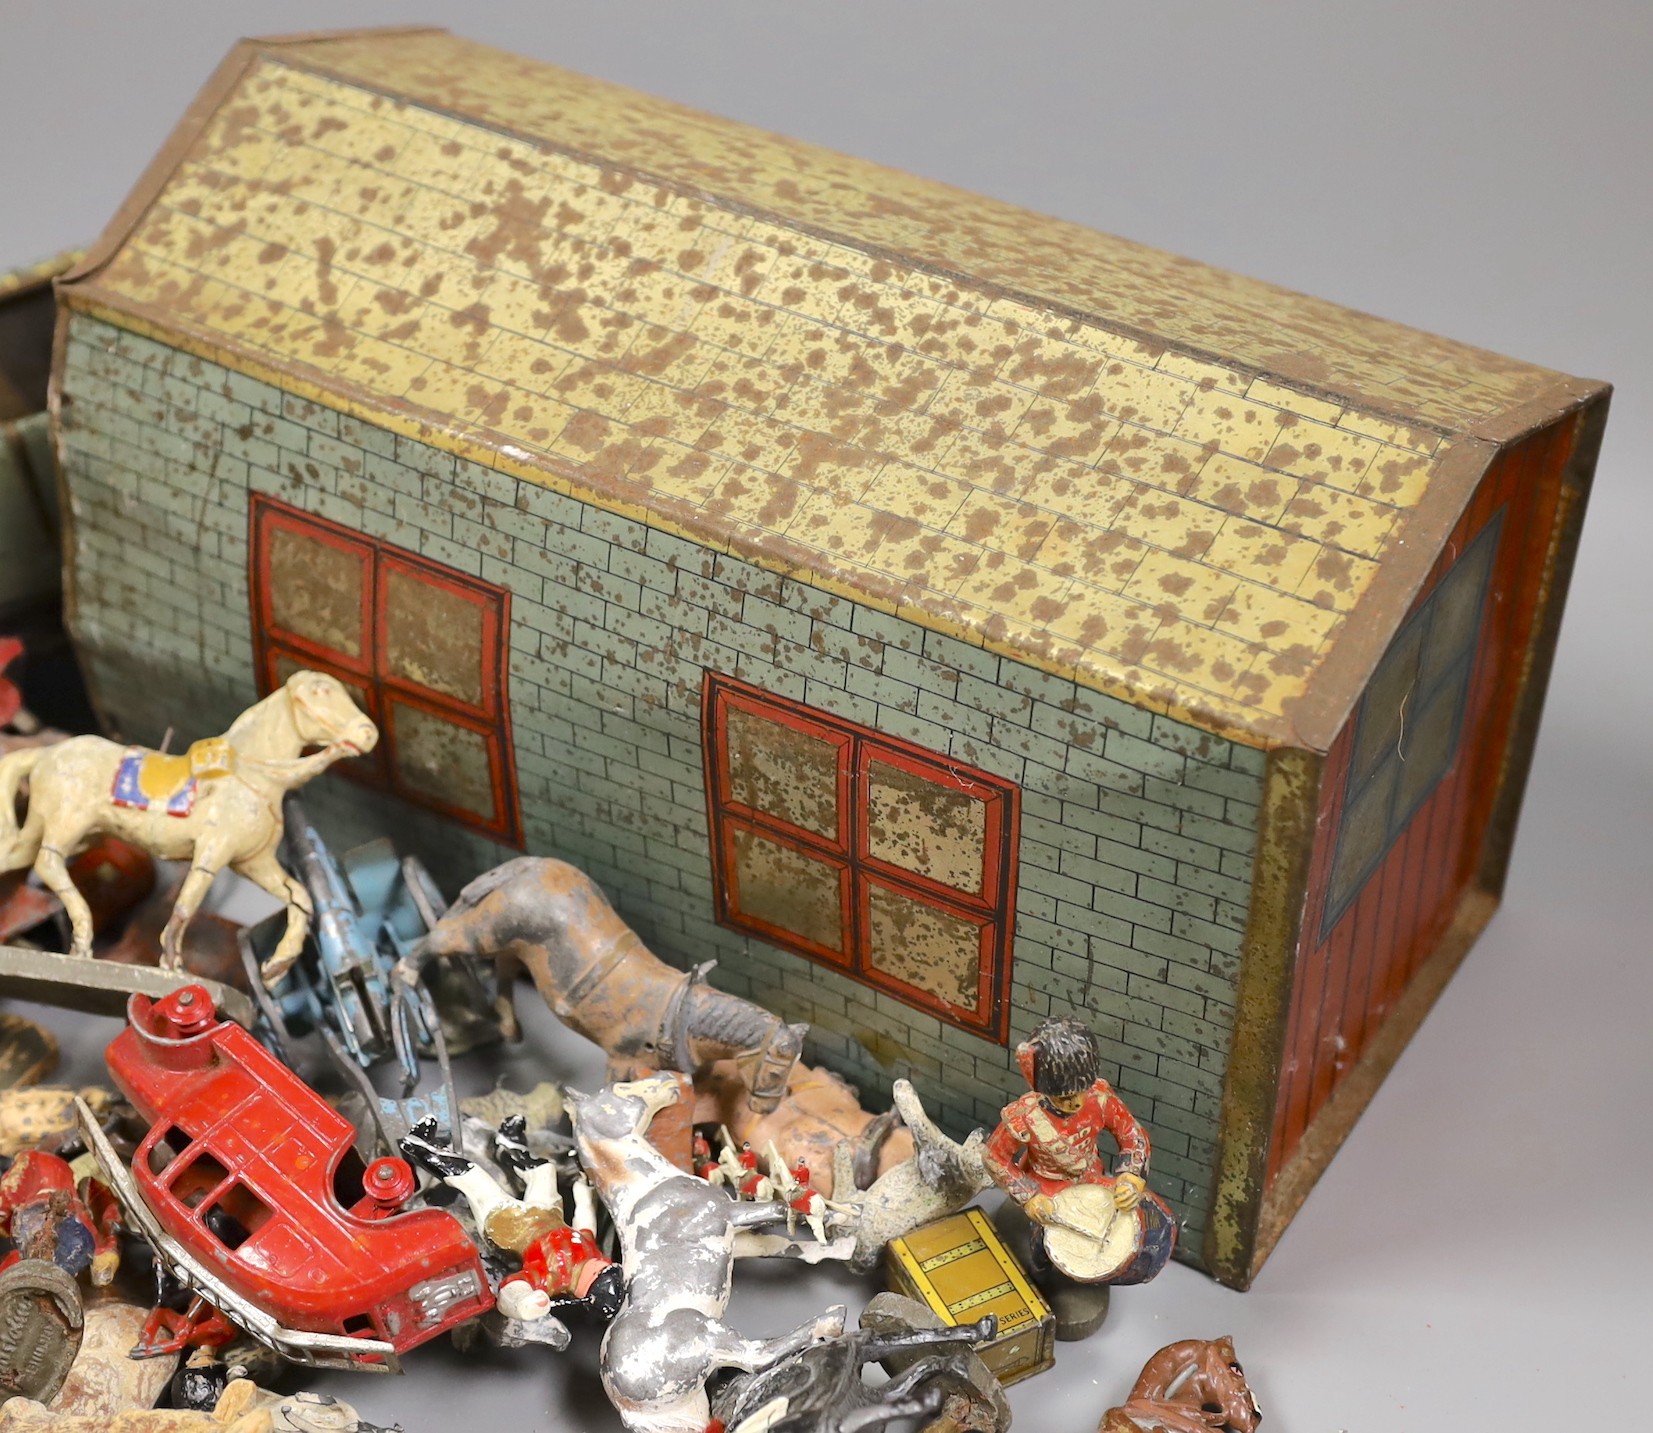 Brenco lithographed tinplate open tourer, and garage, and assorted hollow-cast toys, Elastolic, Dinky Toys, etc.